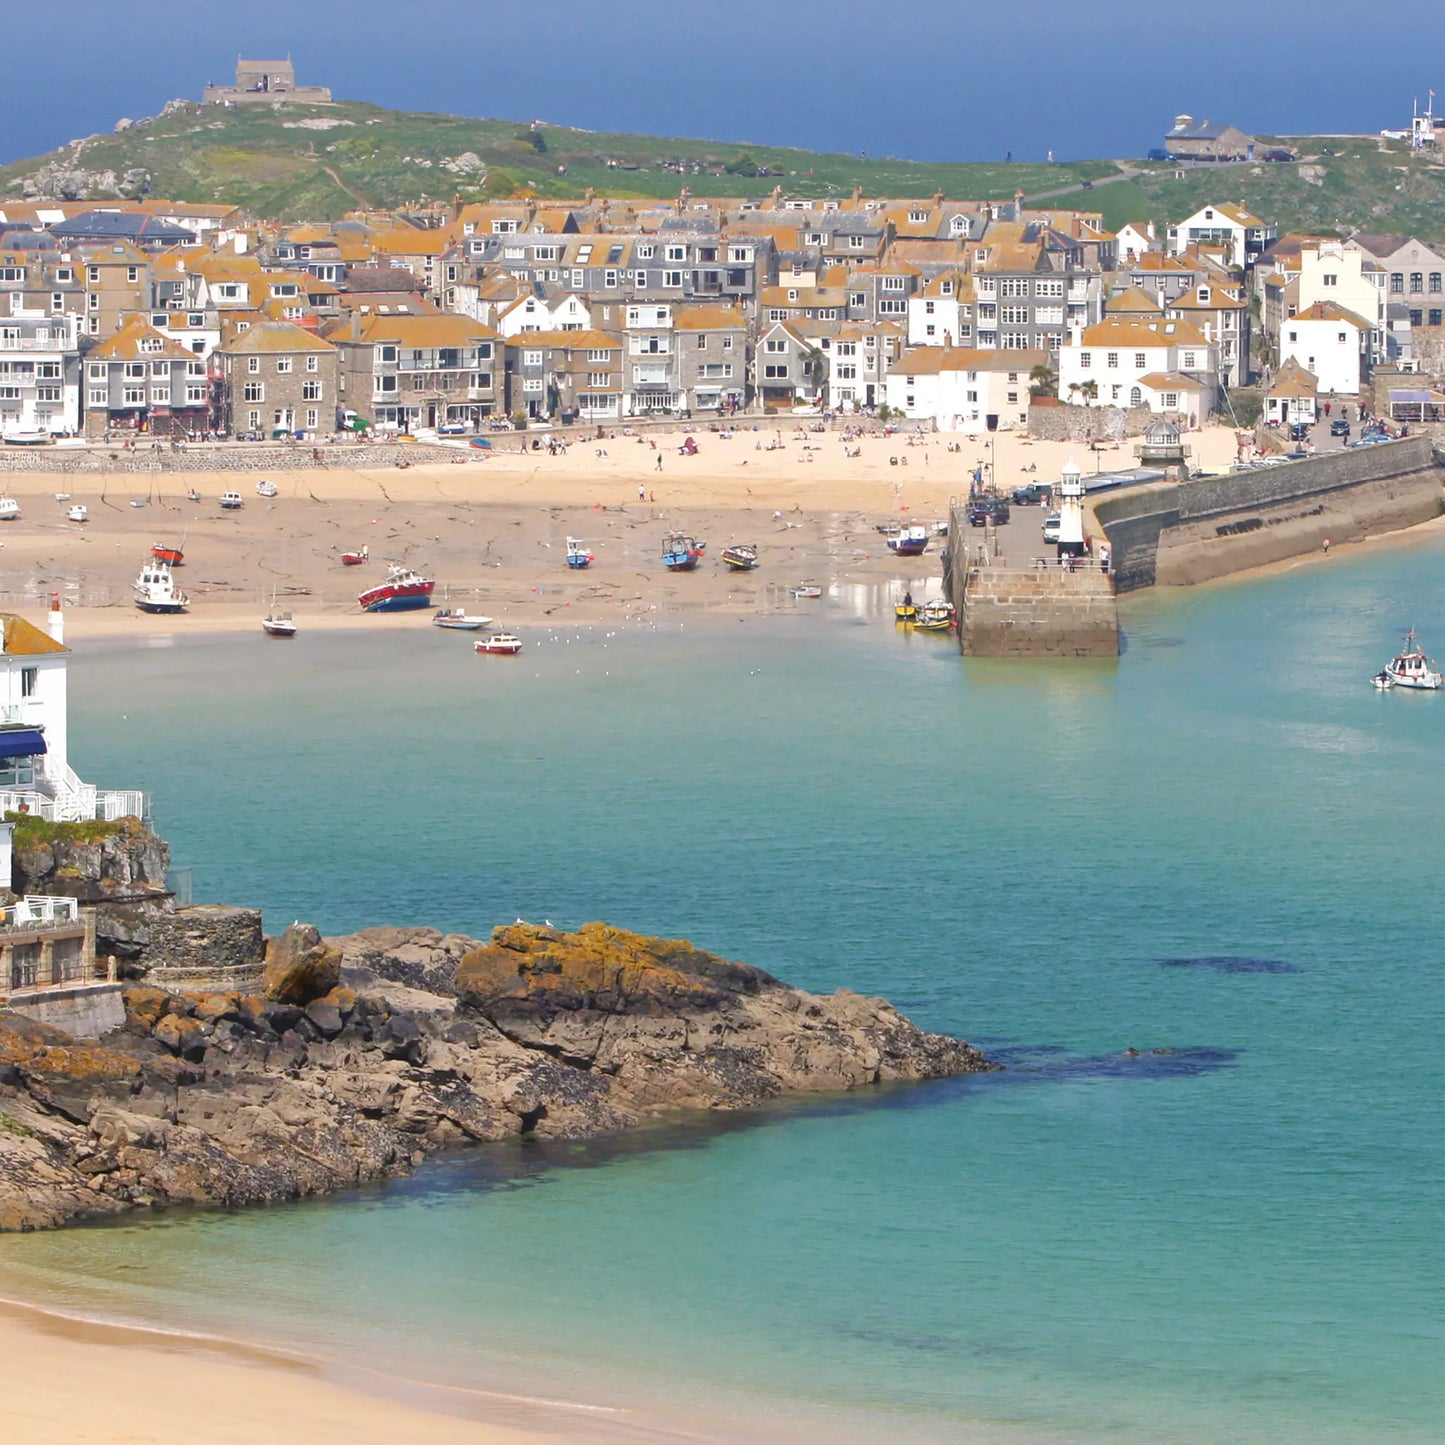 Cornish greetings card image of St Ives harbour on a beautiful day